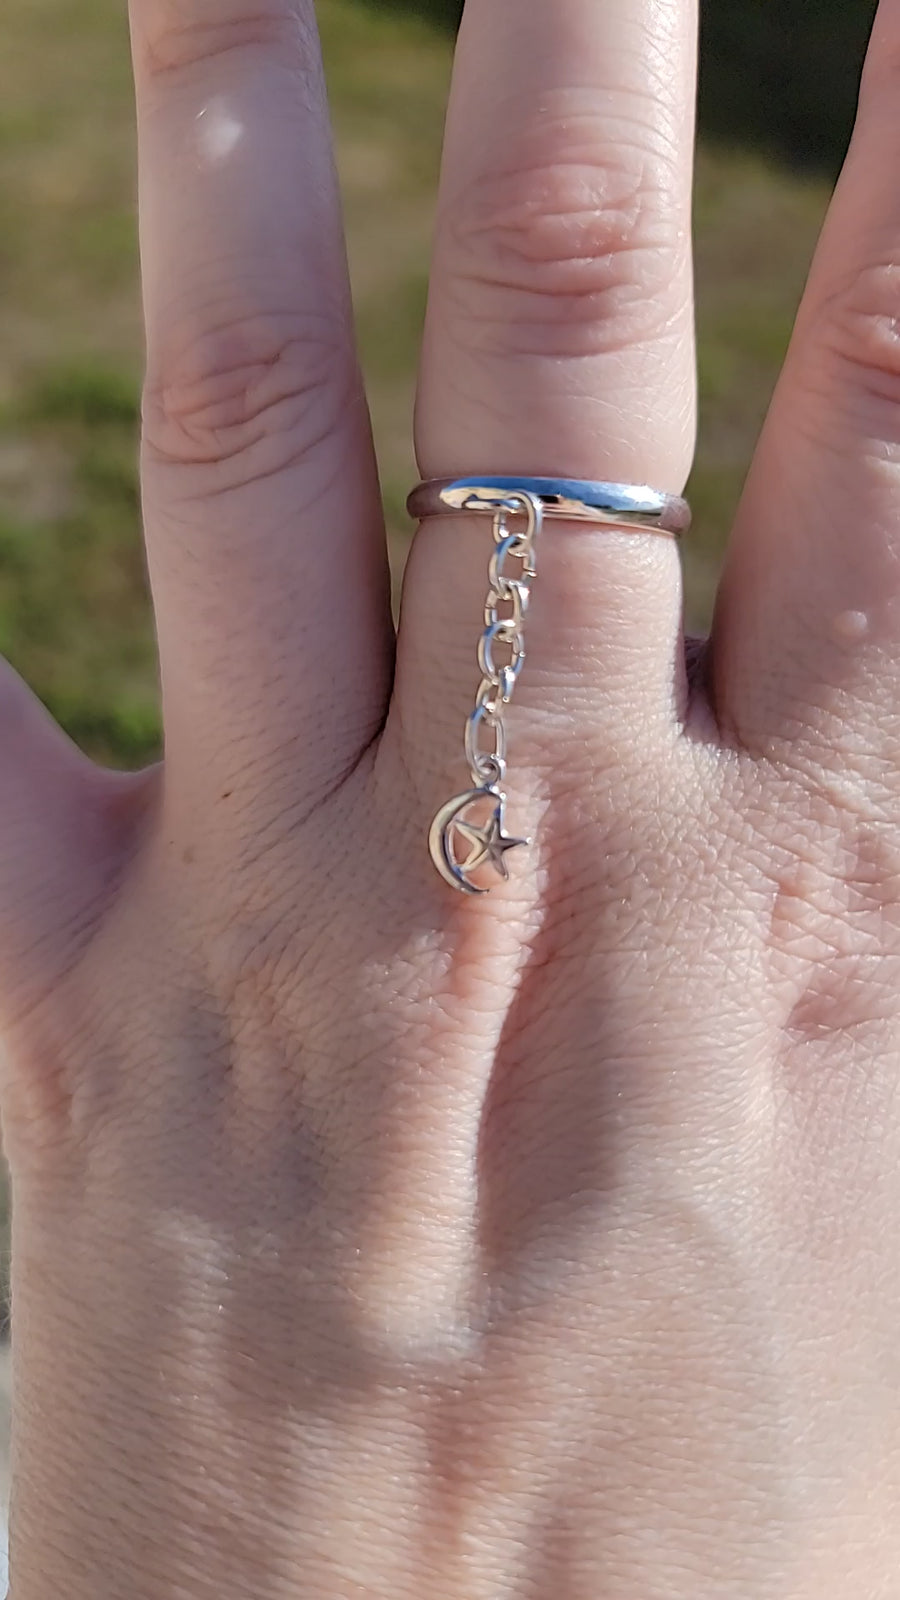 Sterling Silver Crescent Moon & Star Charm Handmade Ring